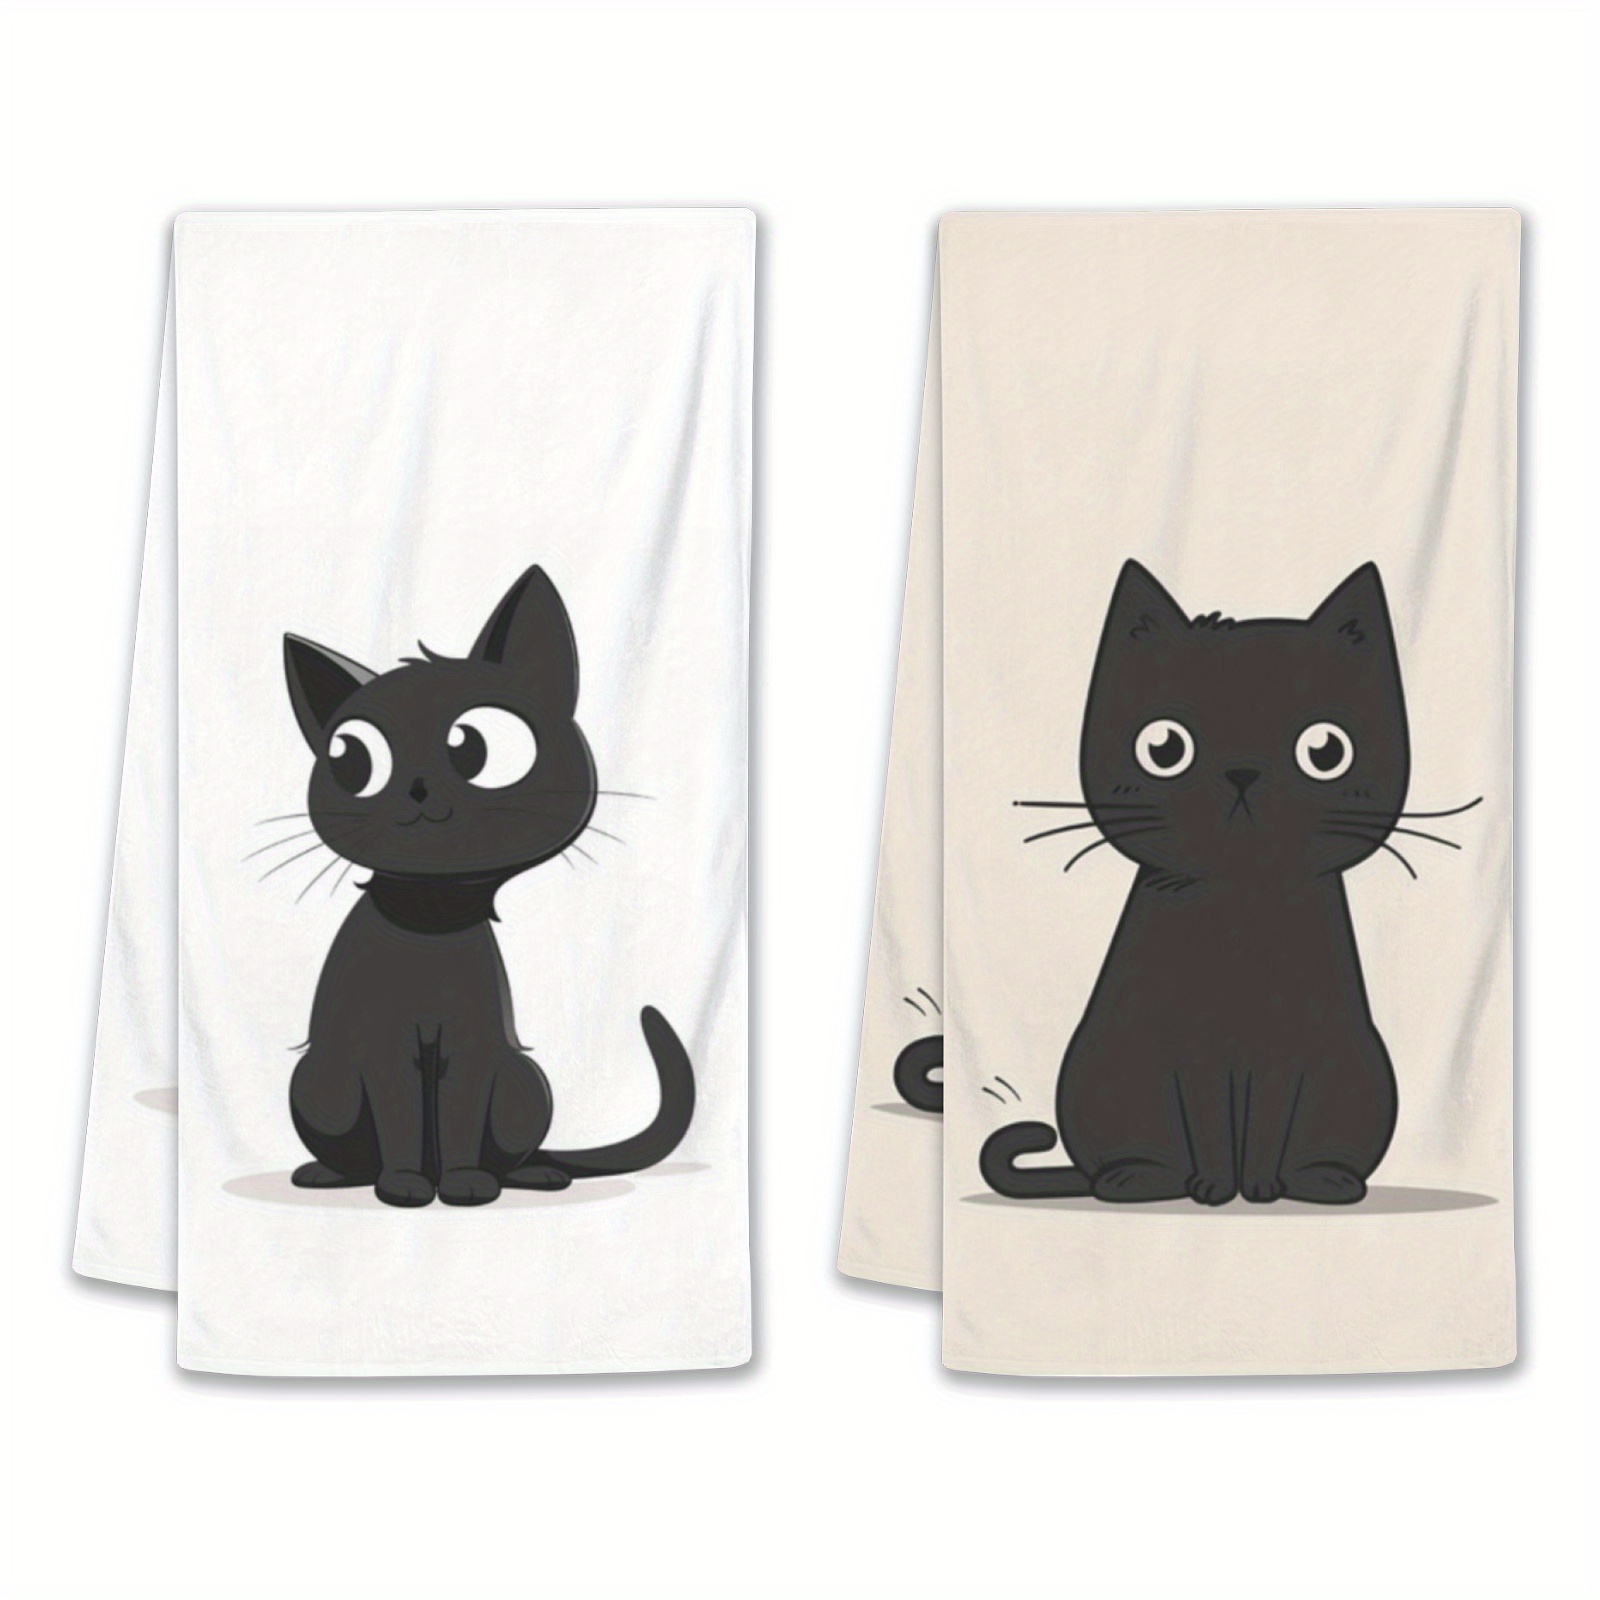 

2pcs, Black Cat Kitchen Towels, Super Soft Terry Cloth, Hand Towels, Non-fading Farmhouse Style, Decorative Indoor & Outdoor Use Towels For Home And Party Decor